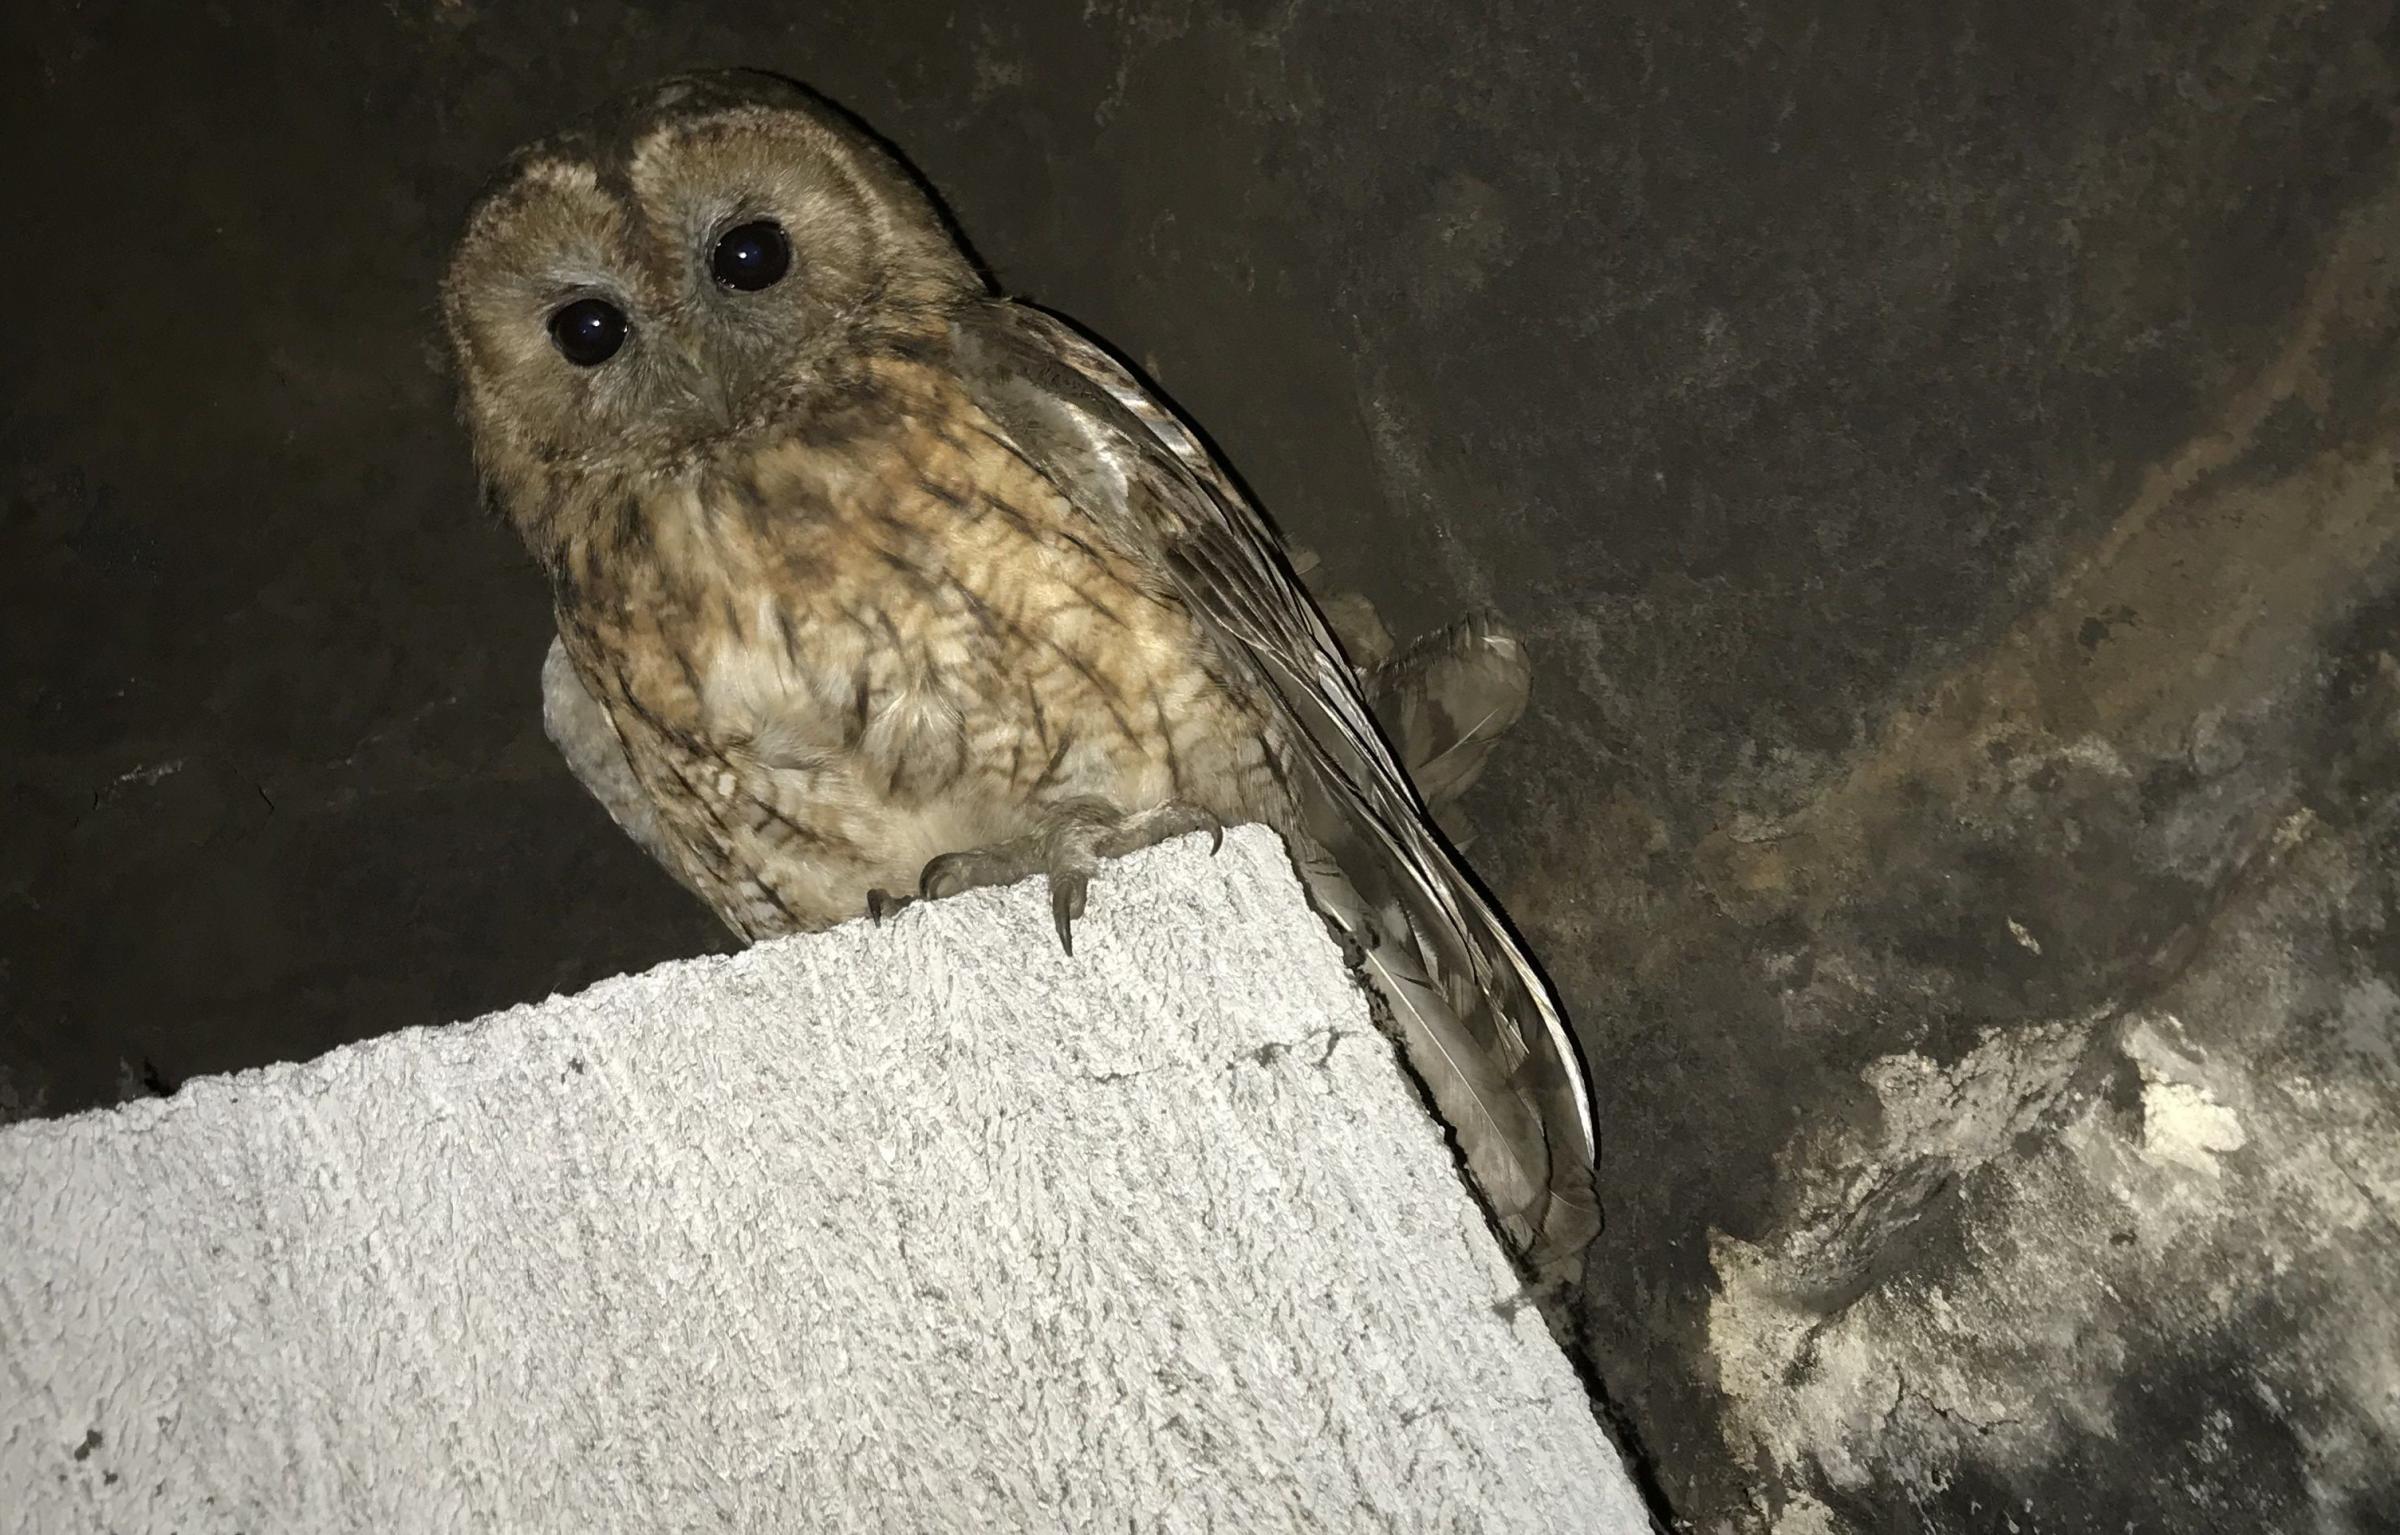 The tawny owl in the chimney